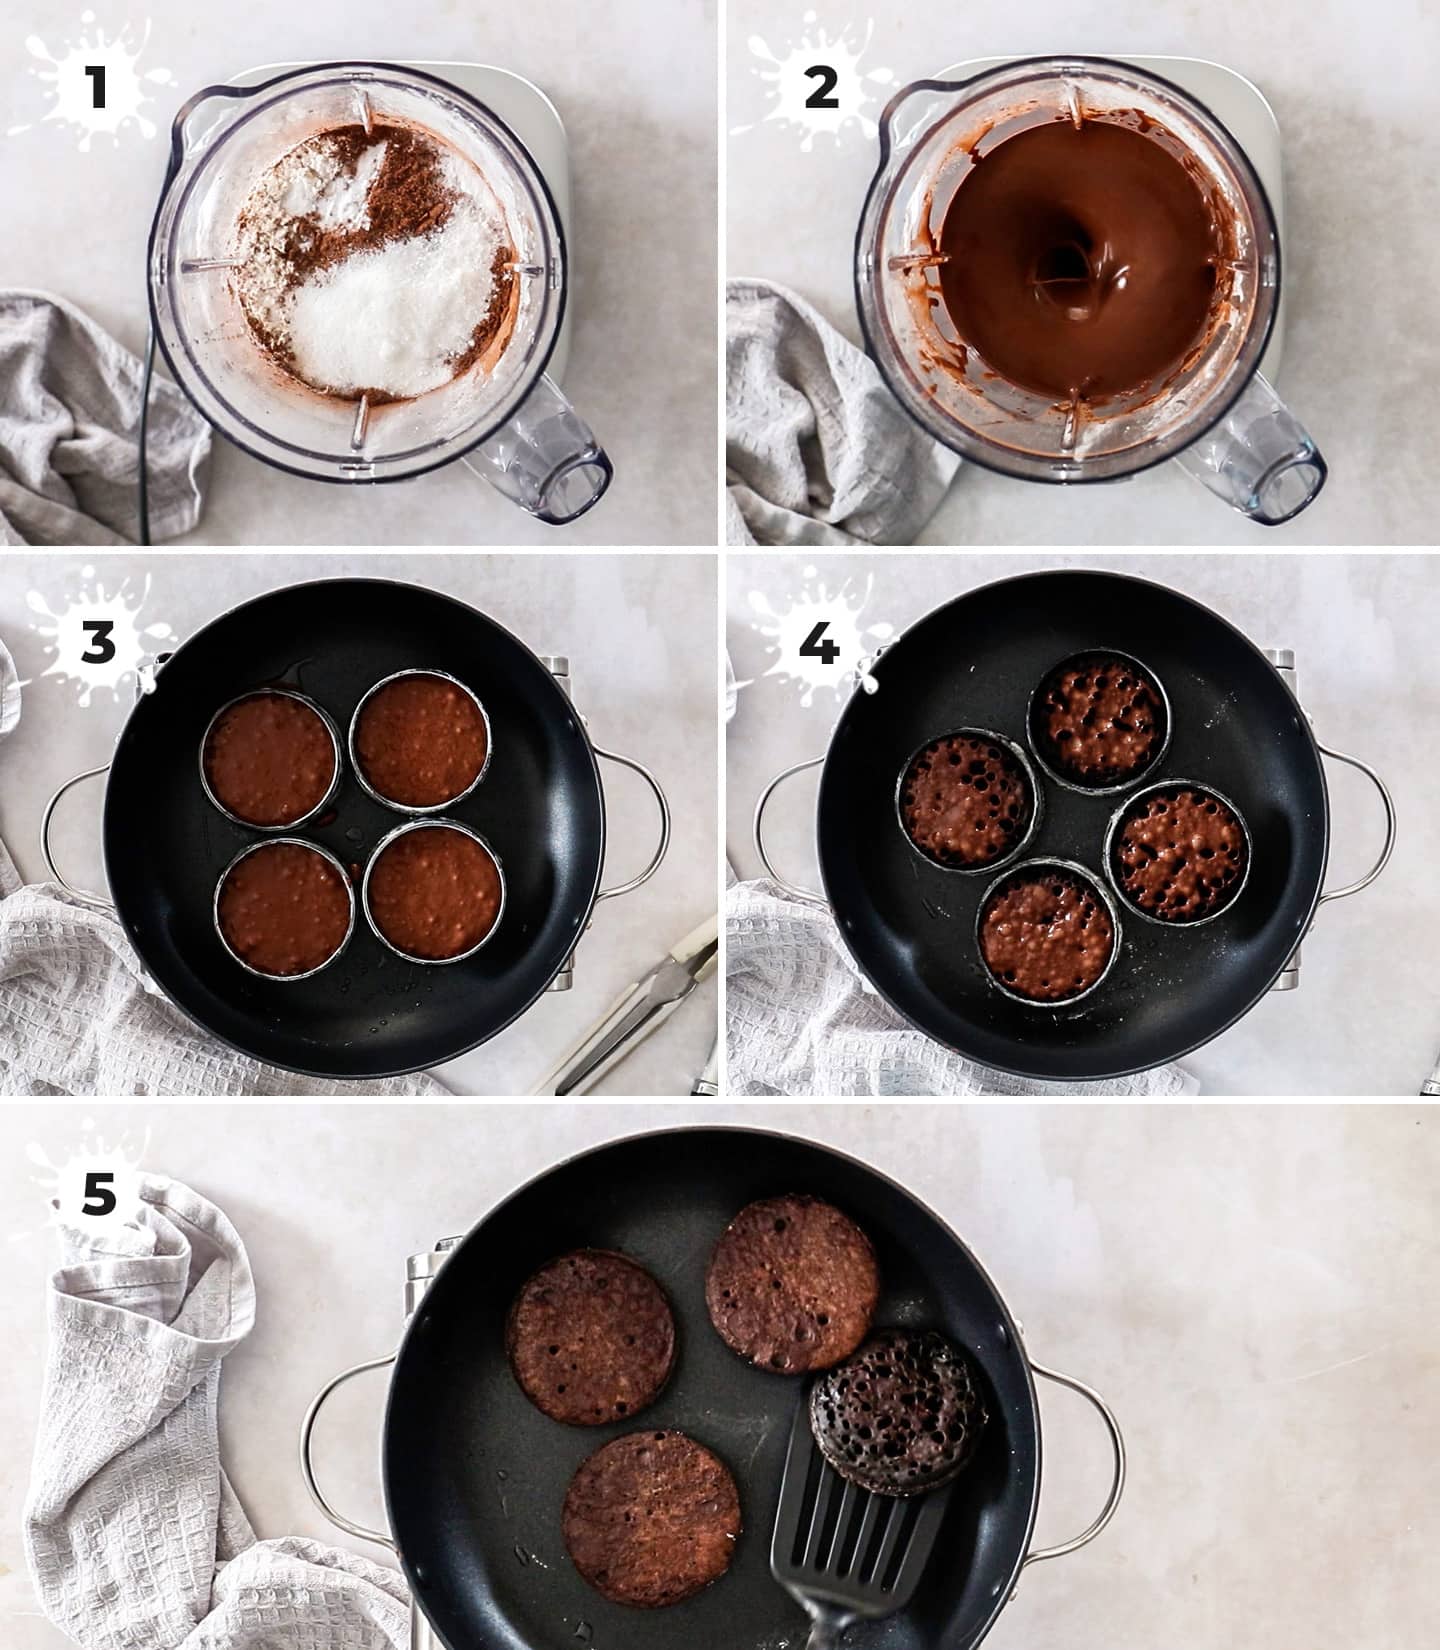 A collage of 5 images showing how to make chocolate crumpets.